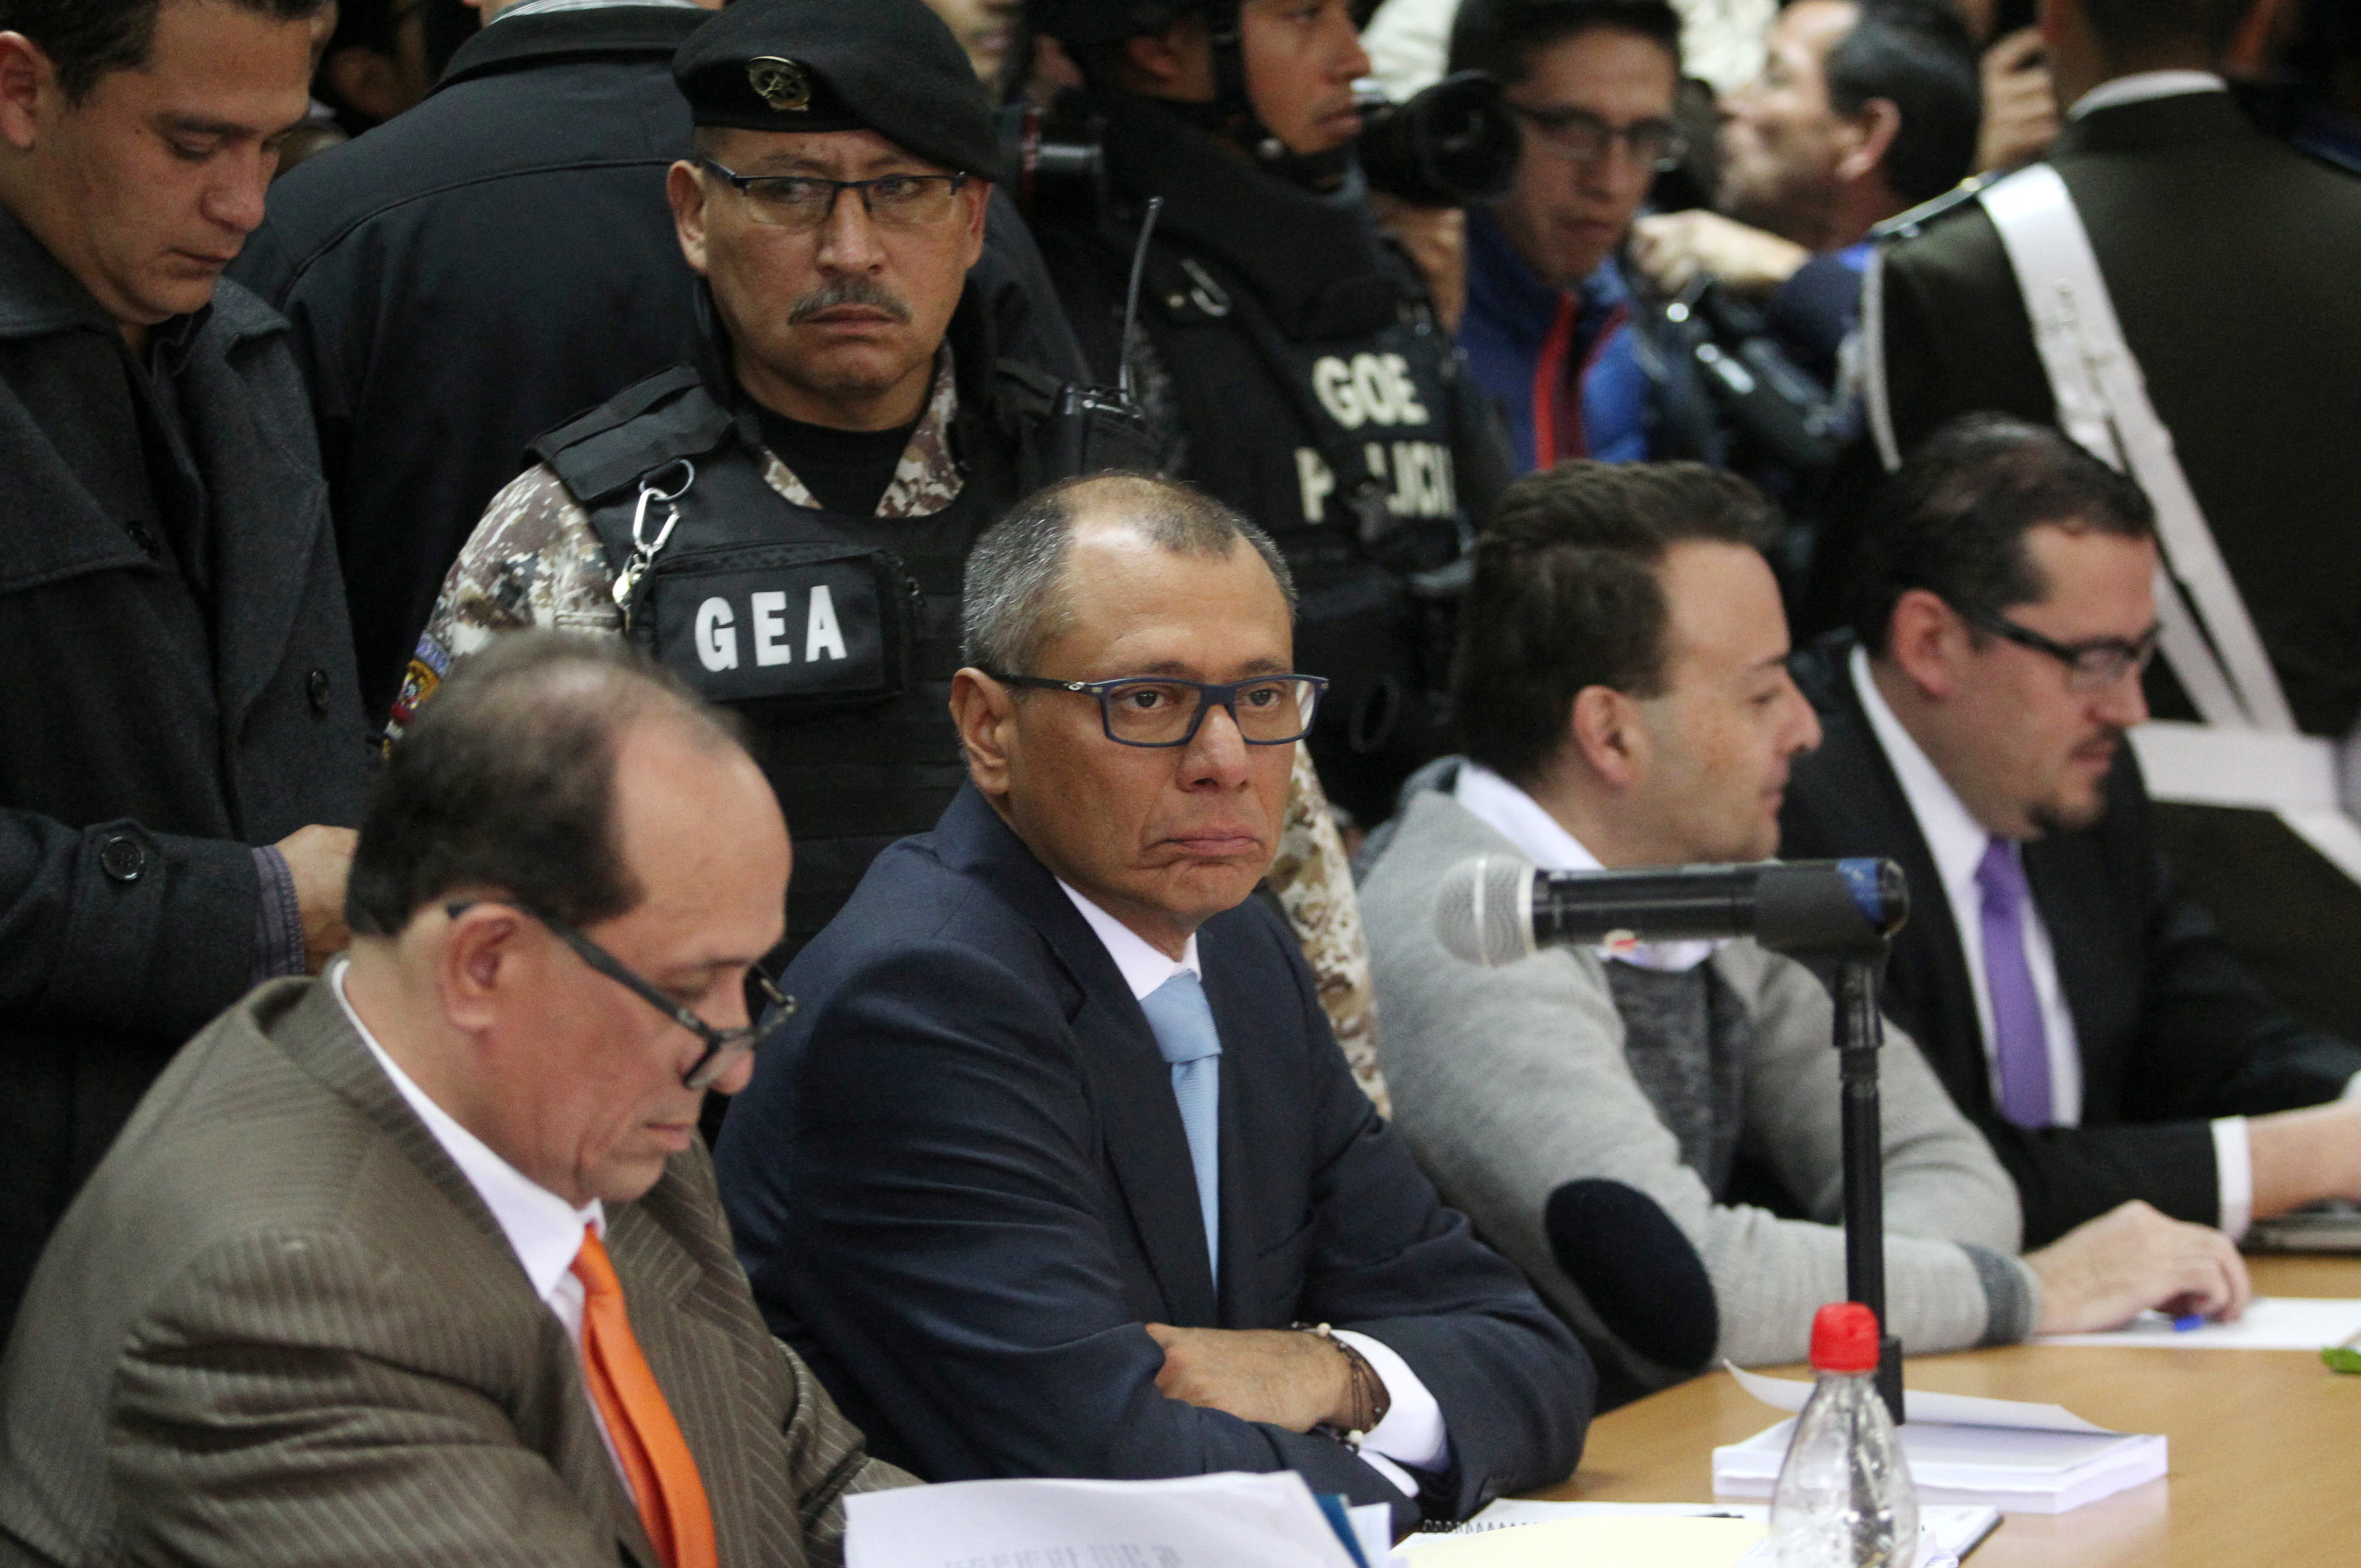 Ecuadorean Vice President Jorge Glas attends a trial for alleged corruption by case Odebrecht at the National Court of Justice in Quito